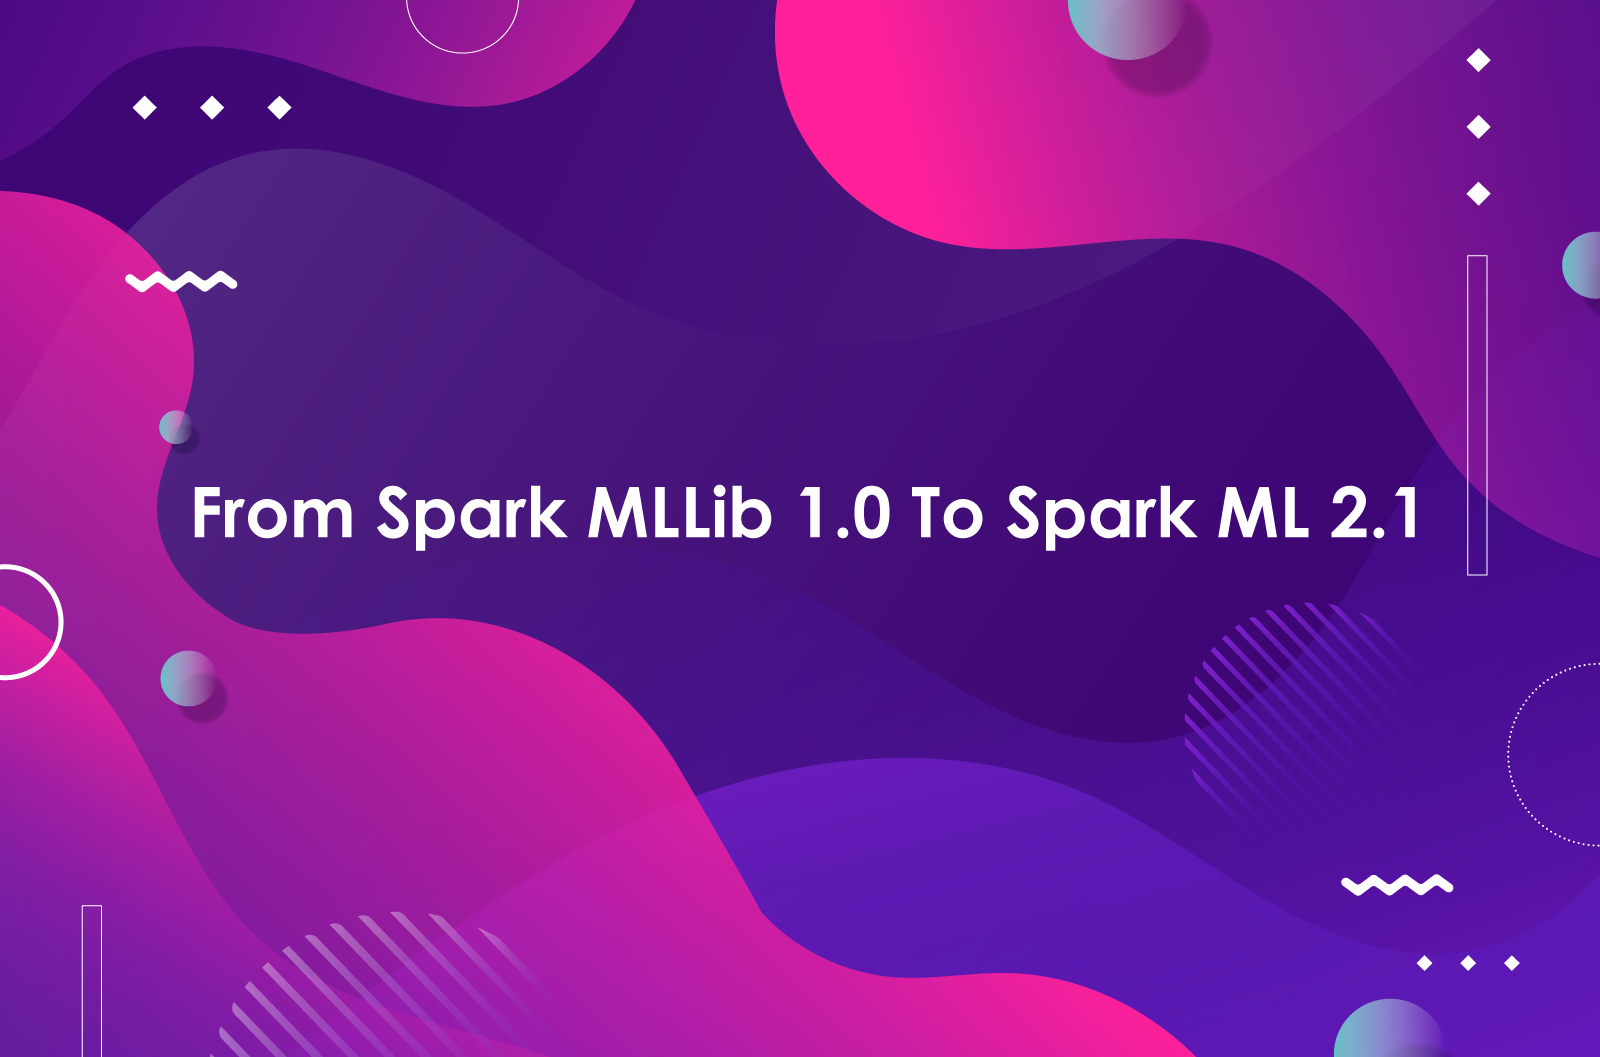 From Spark MLLib 1.0 to Spark ML 2.1